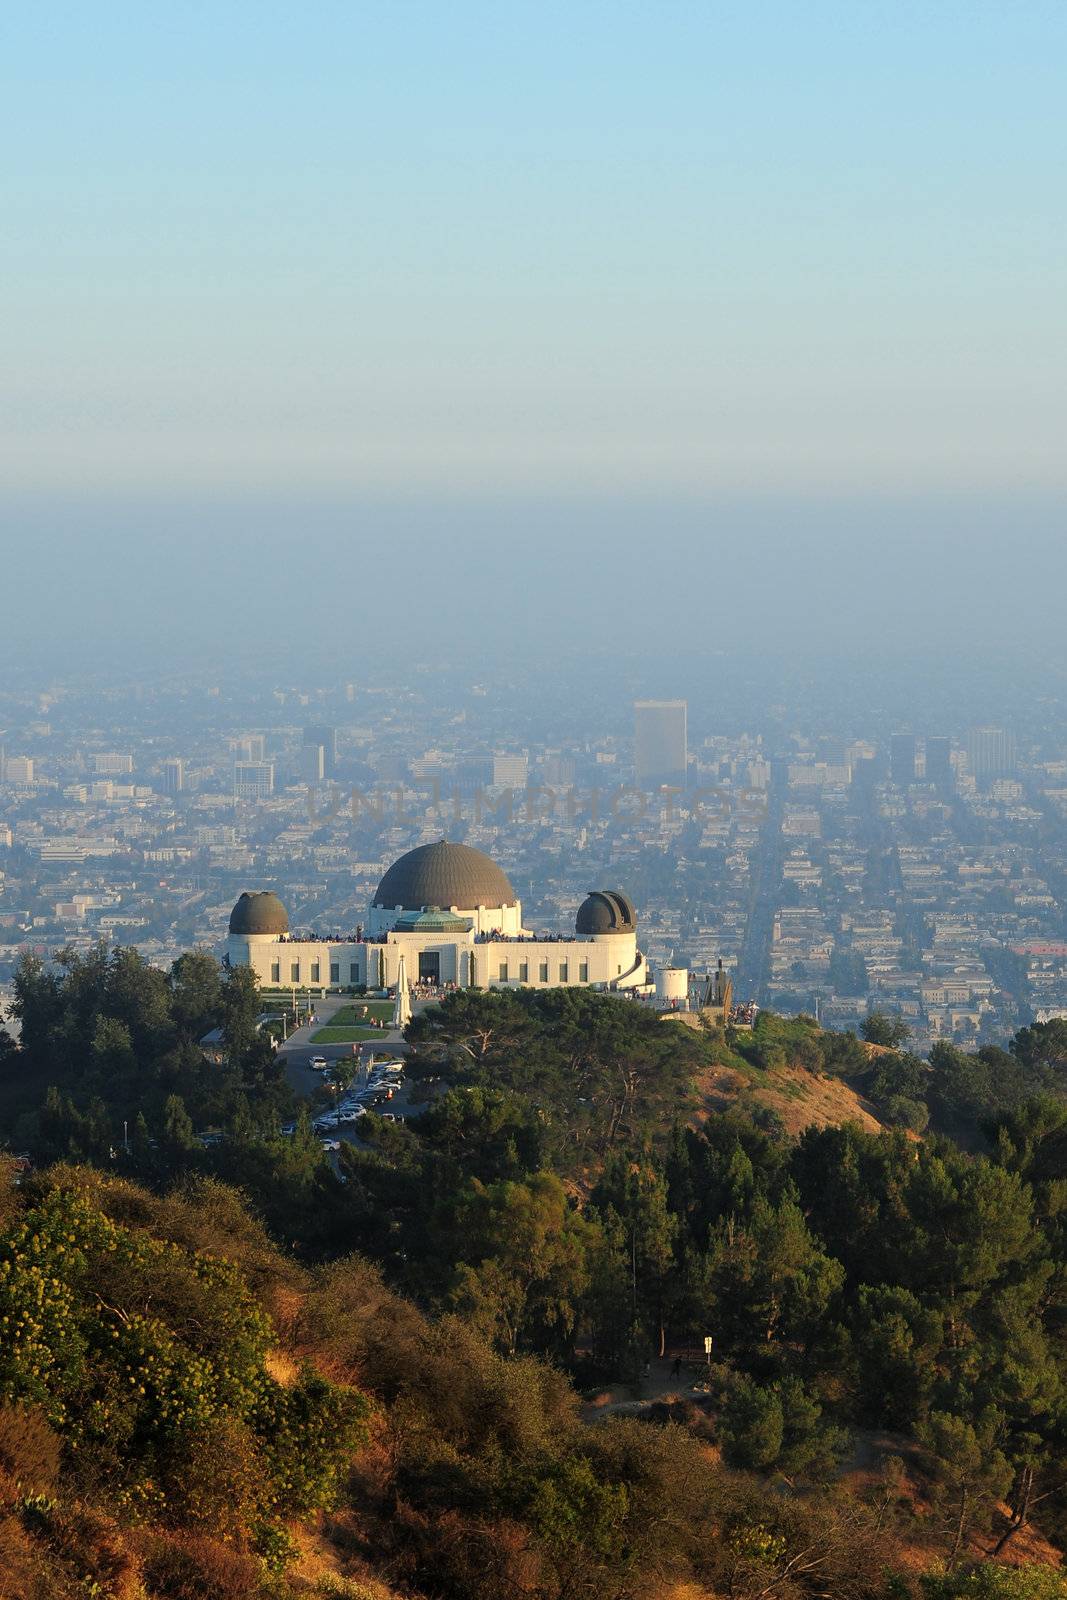 the griffith observatory on the hill